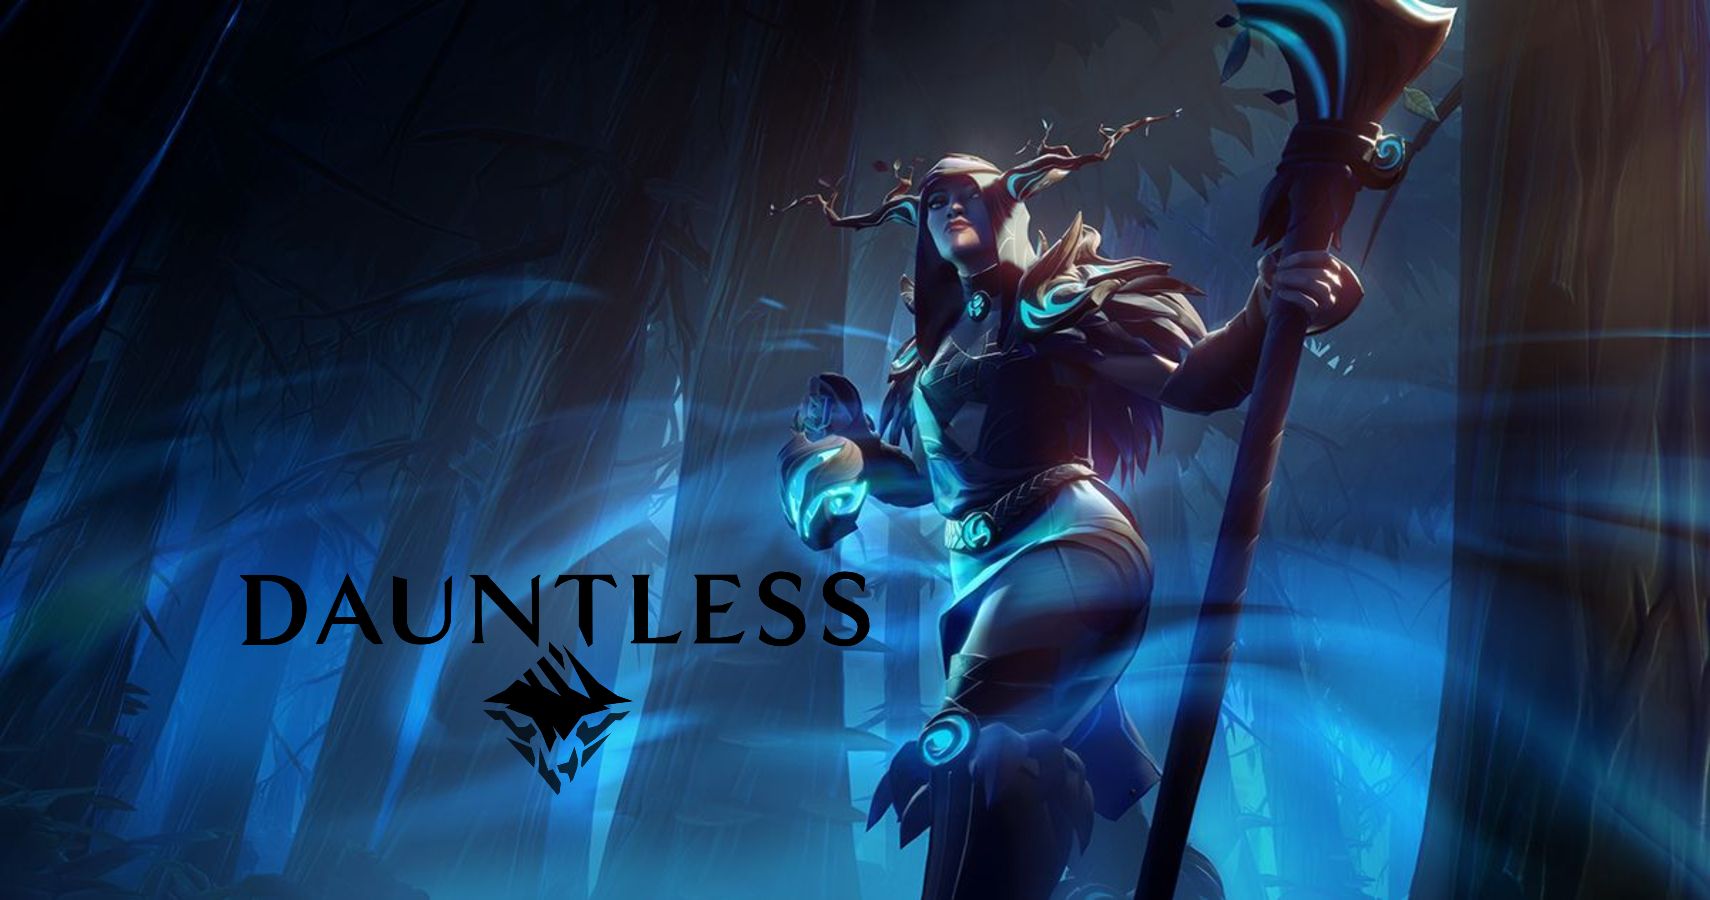 A Special TwoWeek Hunt Pass Is Coming To Dauntless Hinting At The Release Of A Terra Escalation